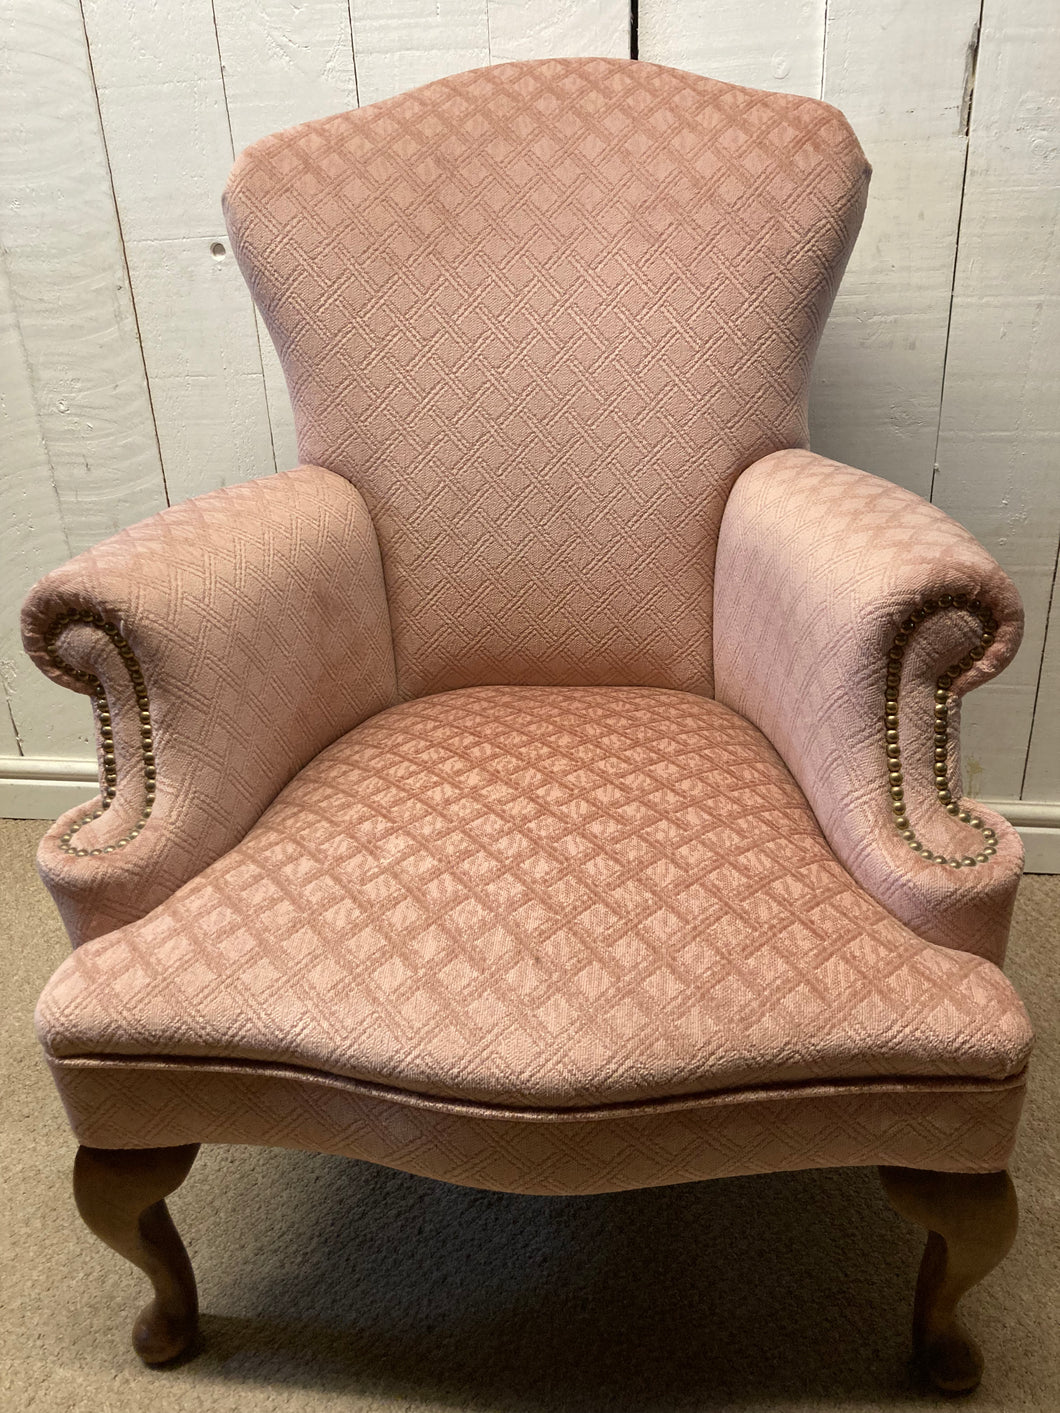 Vintage Pink Upholstered Armchair With Stud Detailing To Arms